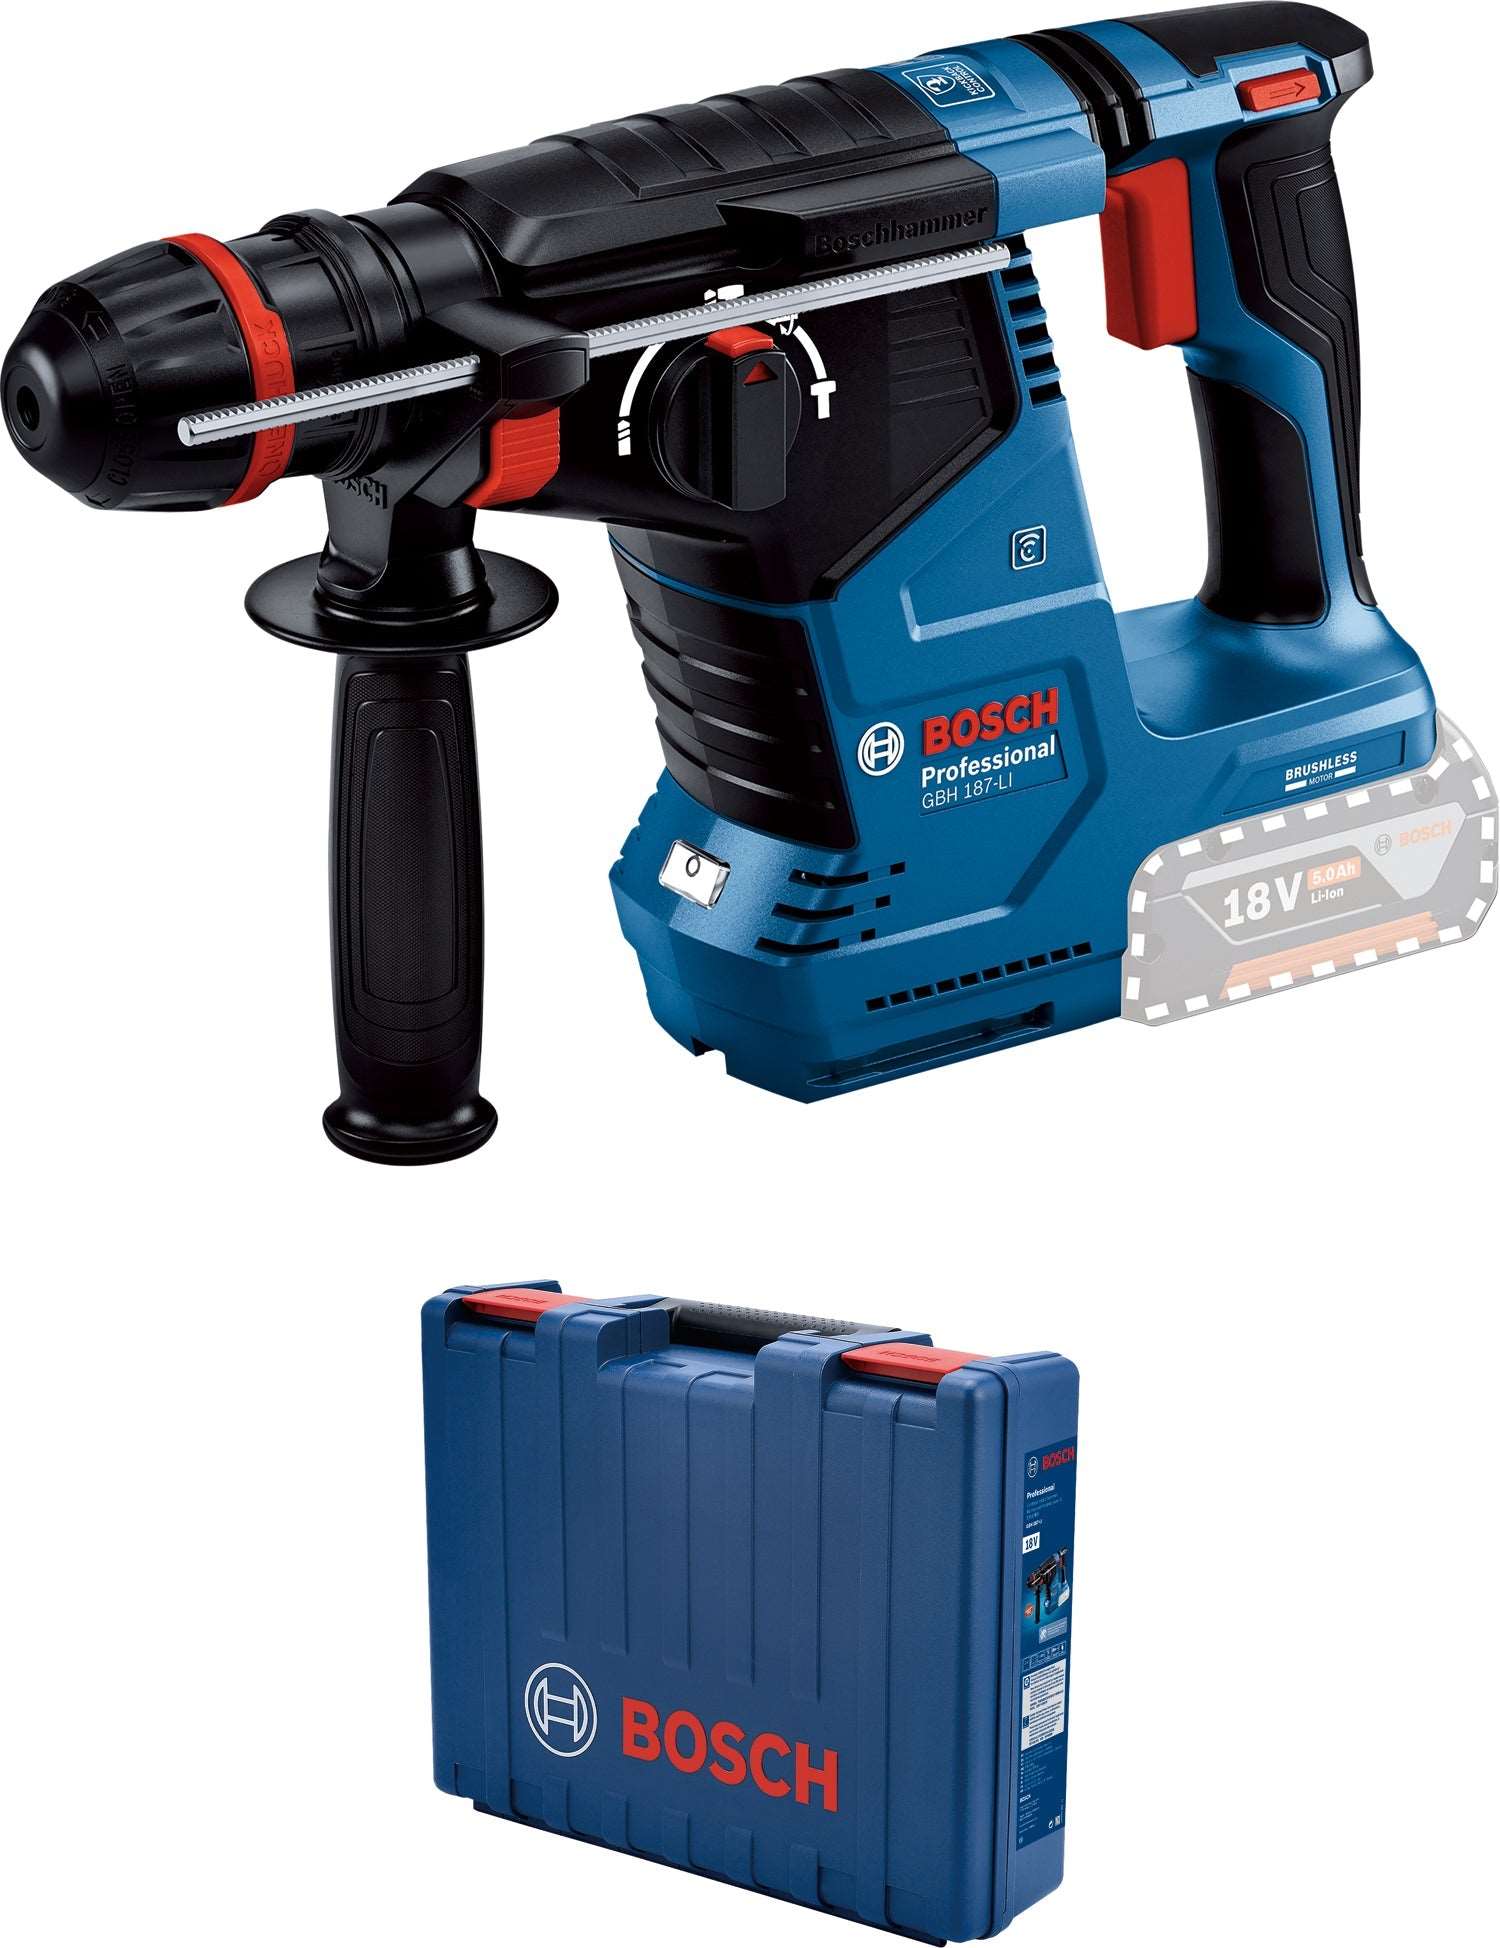 Bosch Professional Cordless Rotary Hammer GBH 187-LI Solo 0611923181 Power Tool Services